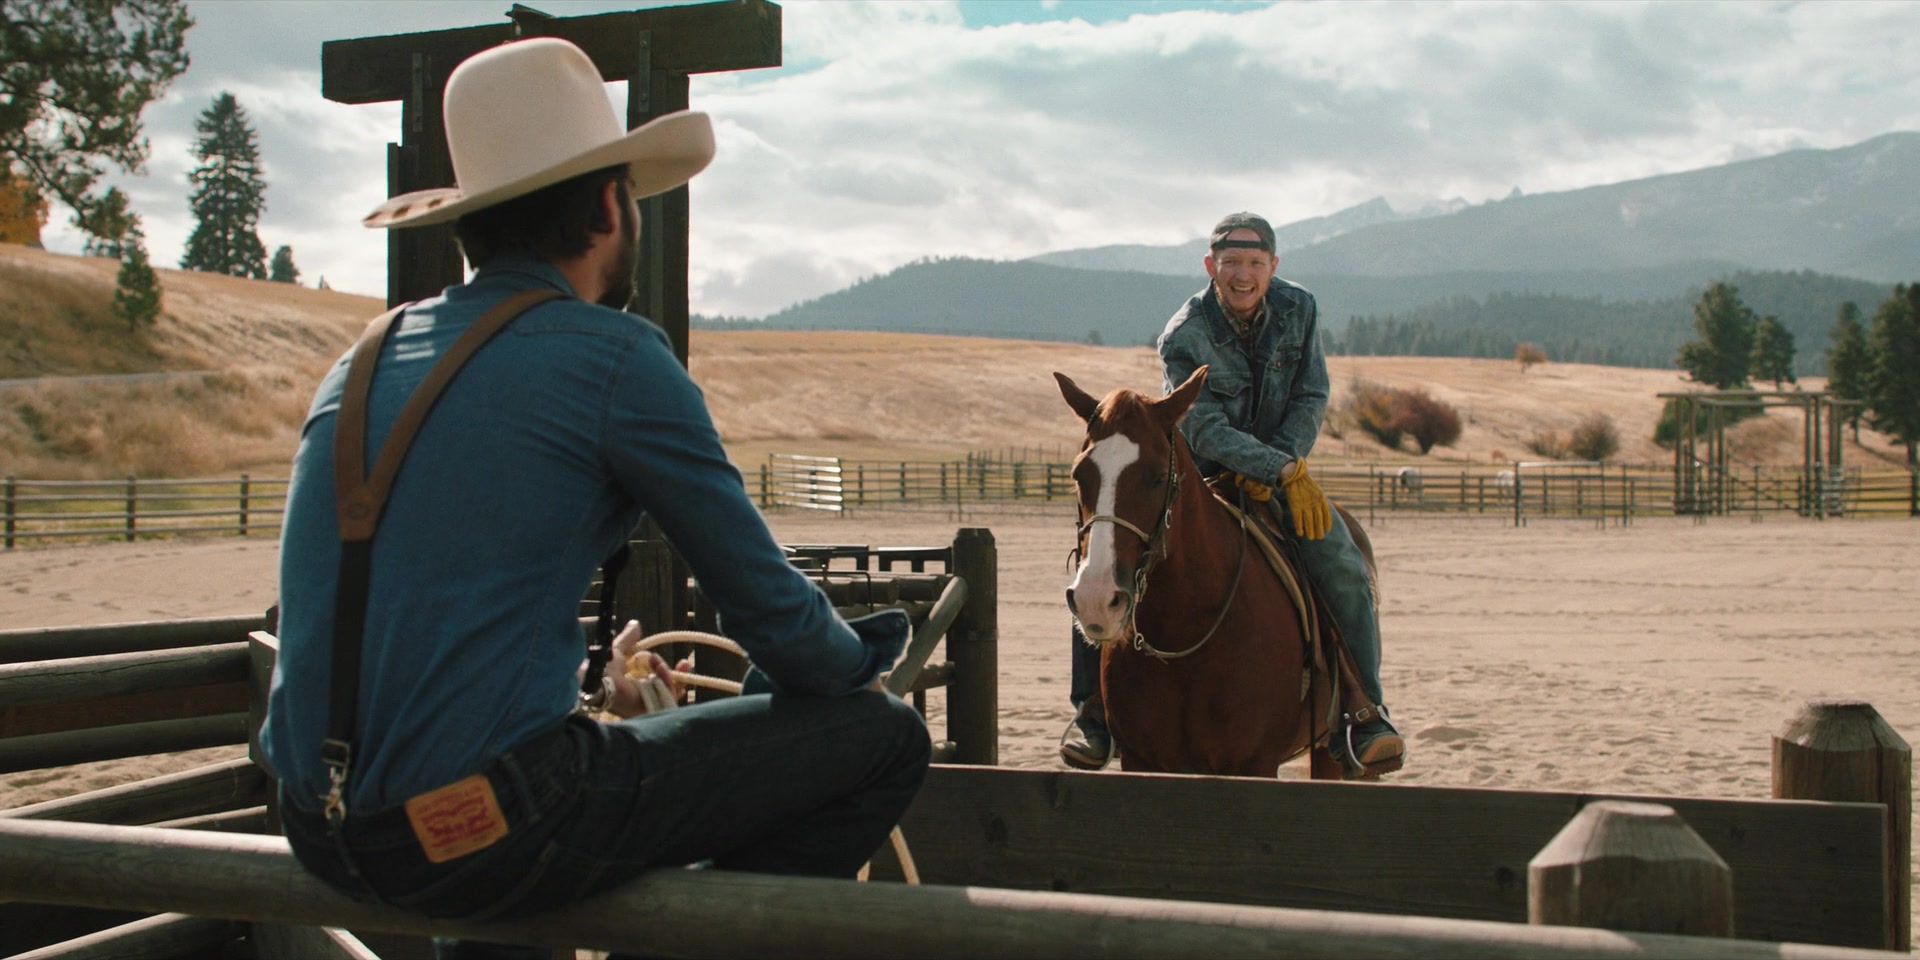 Levi's Men's Jeans Worn By Actor In Yellowstone - Season 2, Episode 5,  Touching Your Enemy (2019)